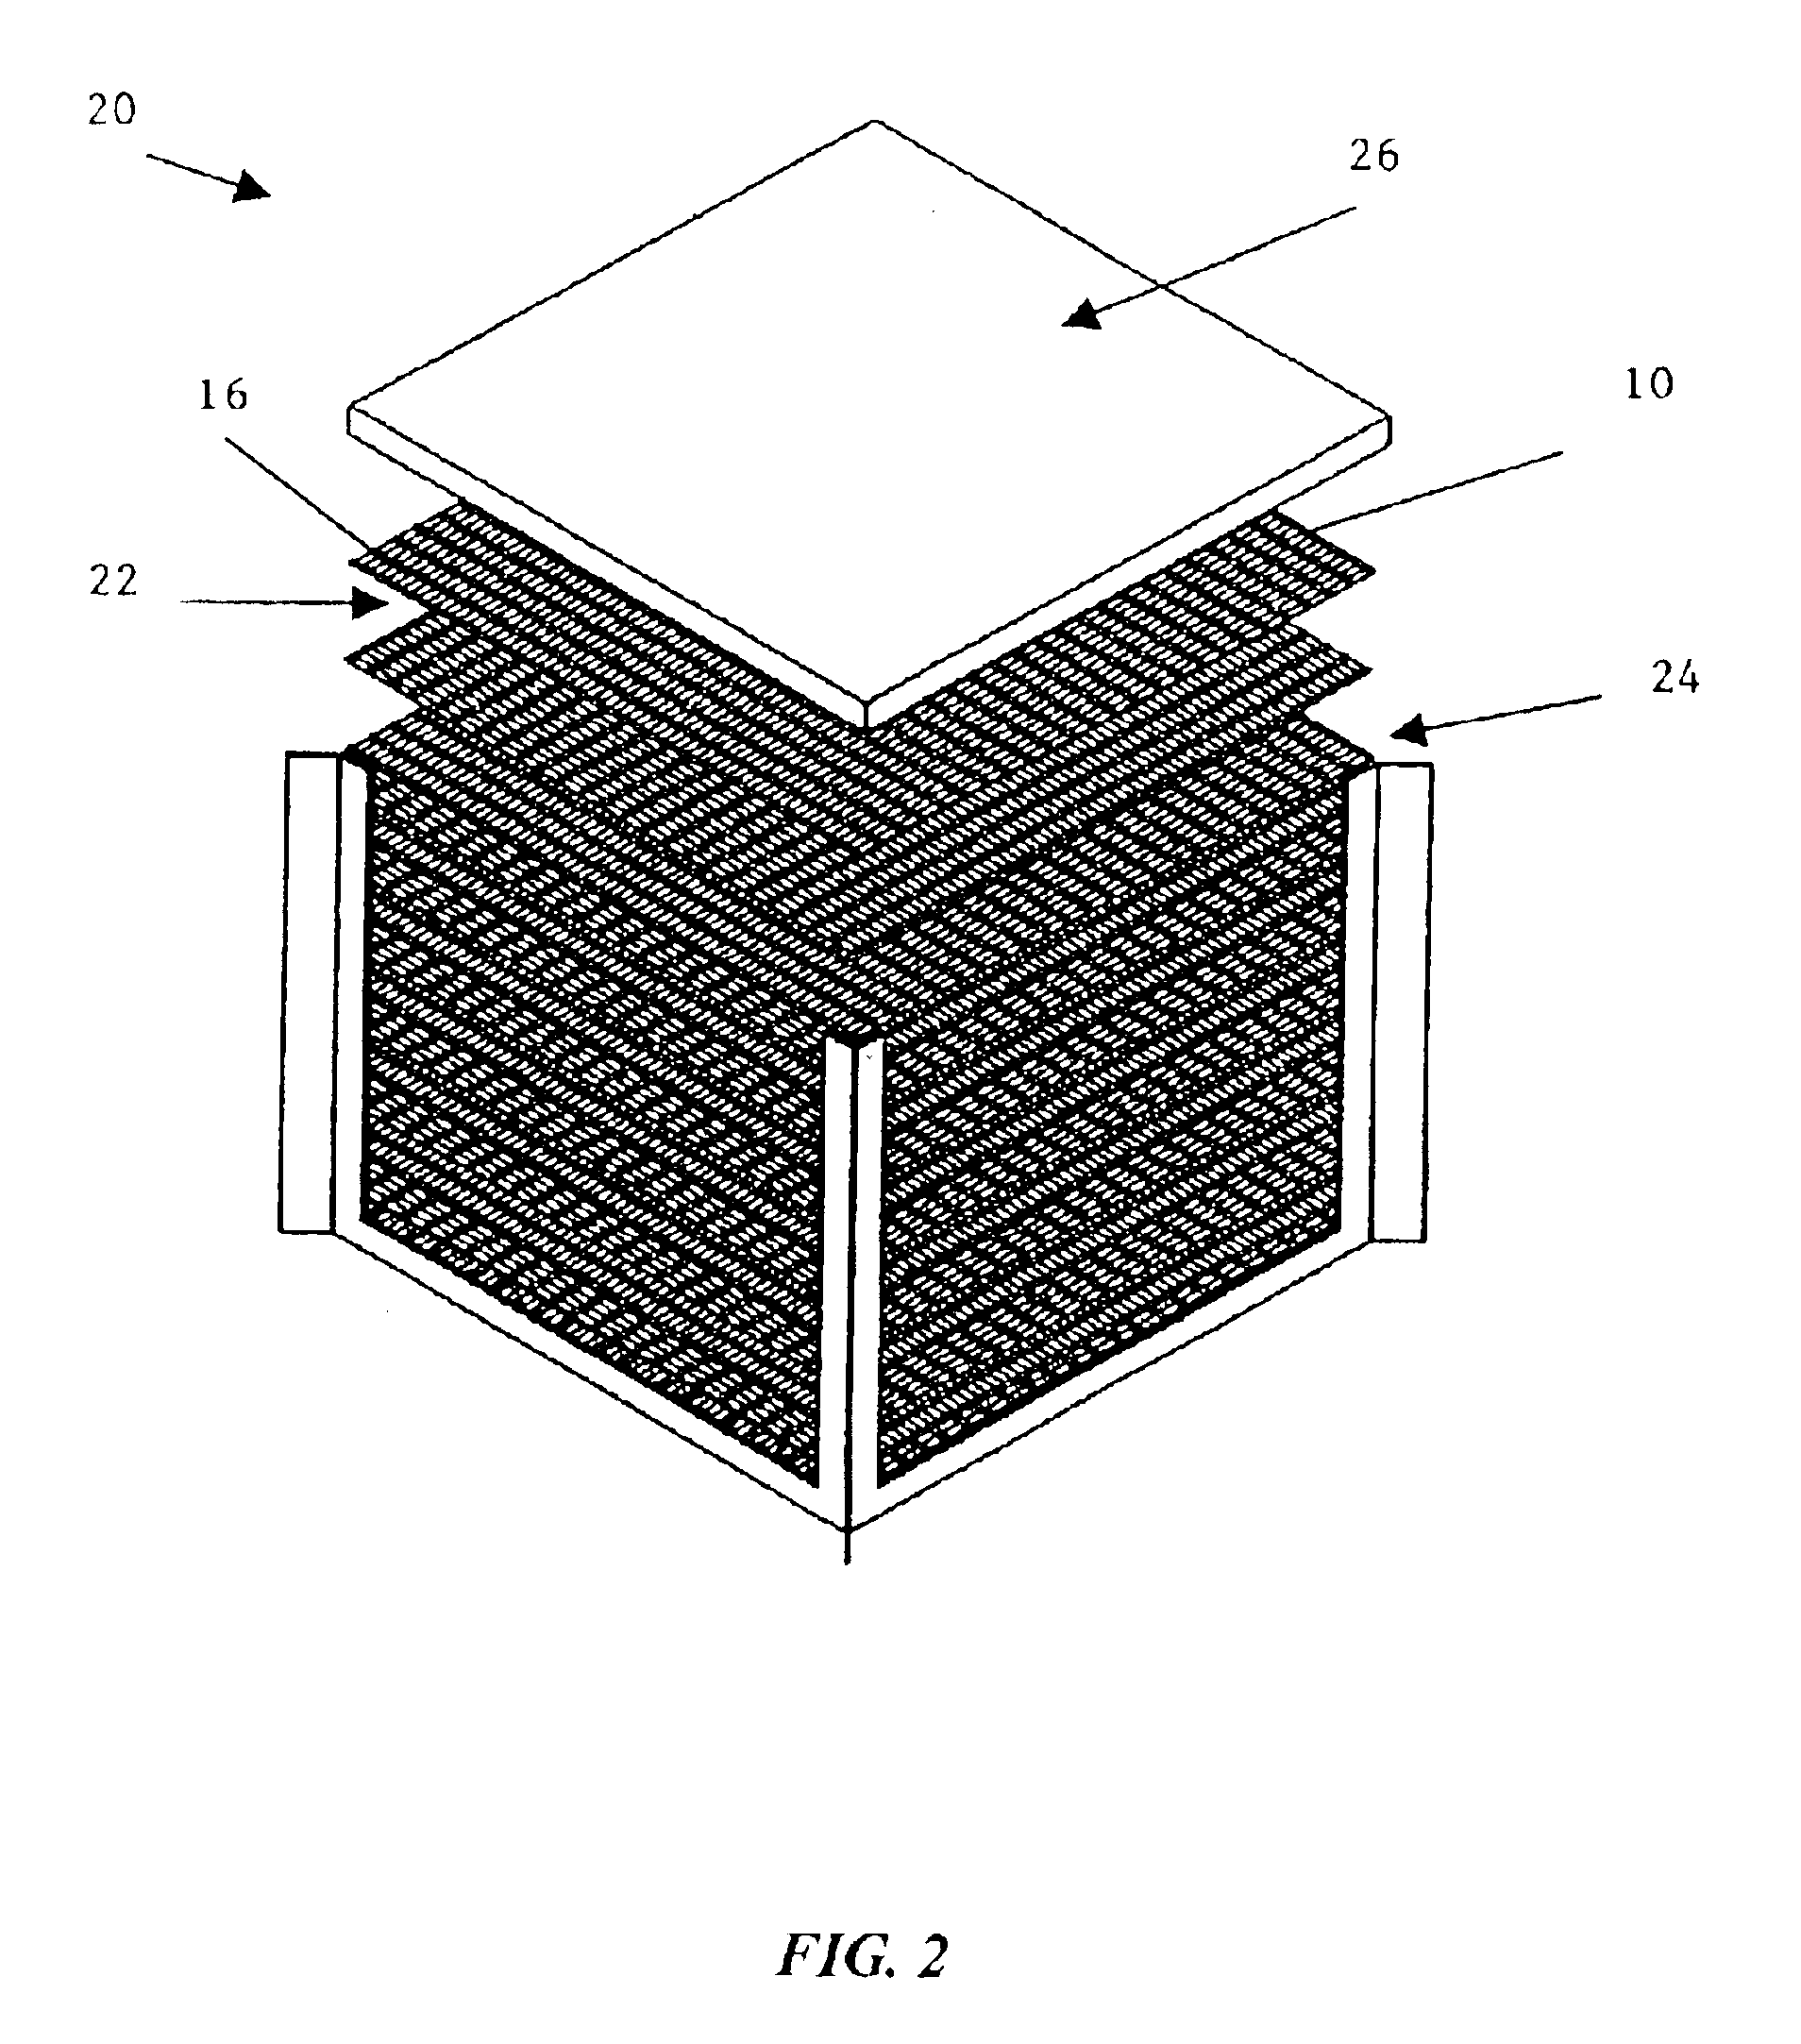 Crosslinked polymer electrolyte membranes for heat and moisture exchange devices